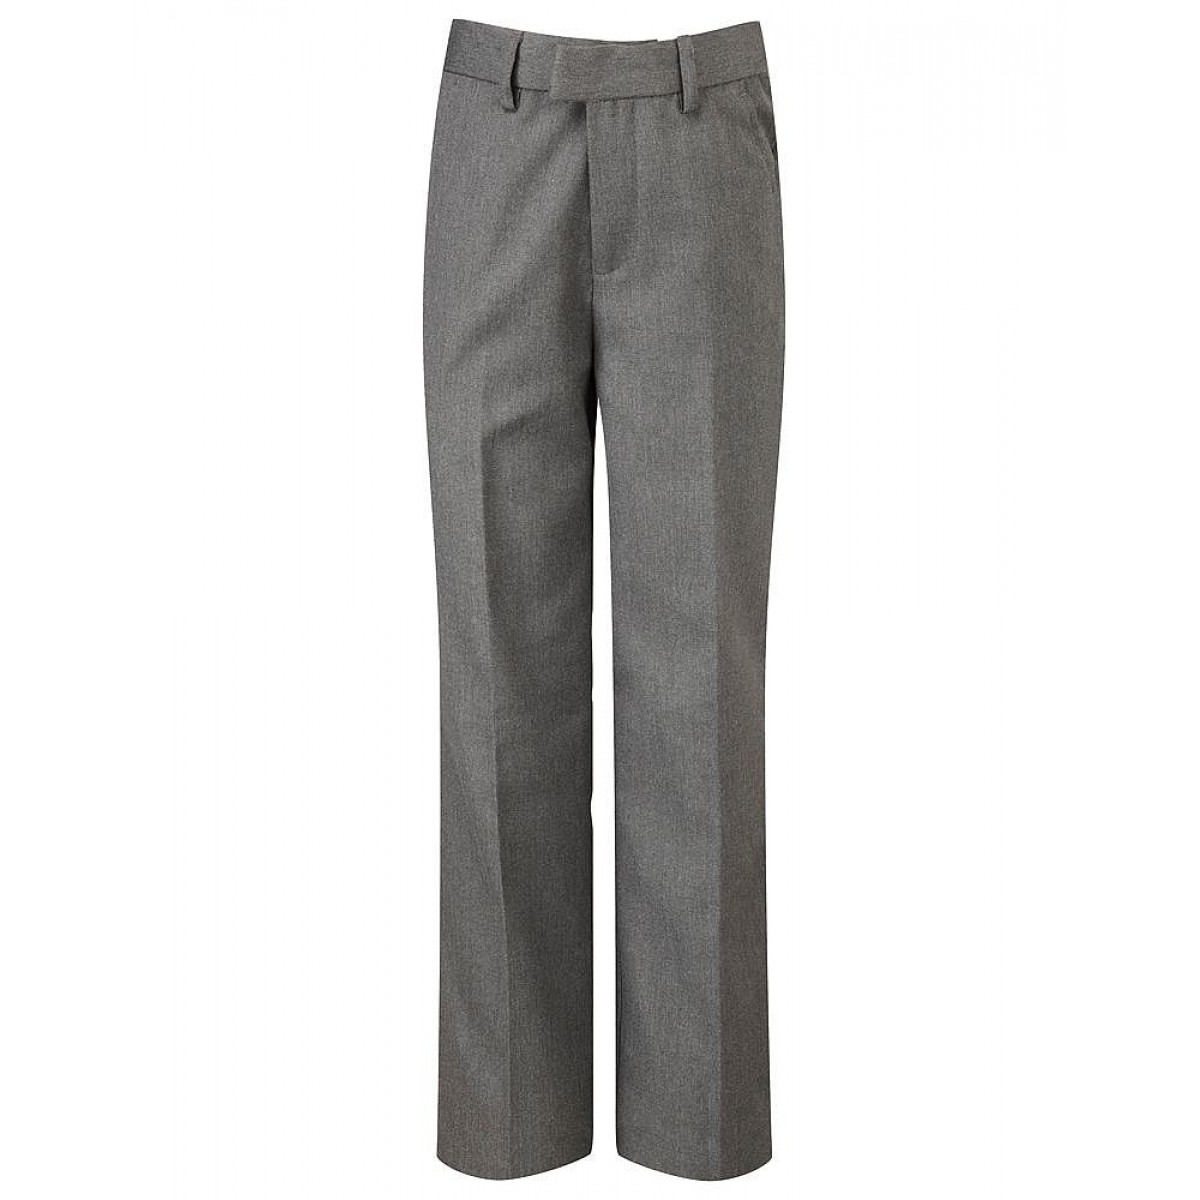 Junior Mid Grey Trousers - Waist 20"" (age 3/4)